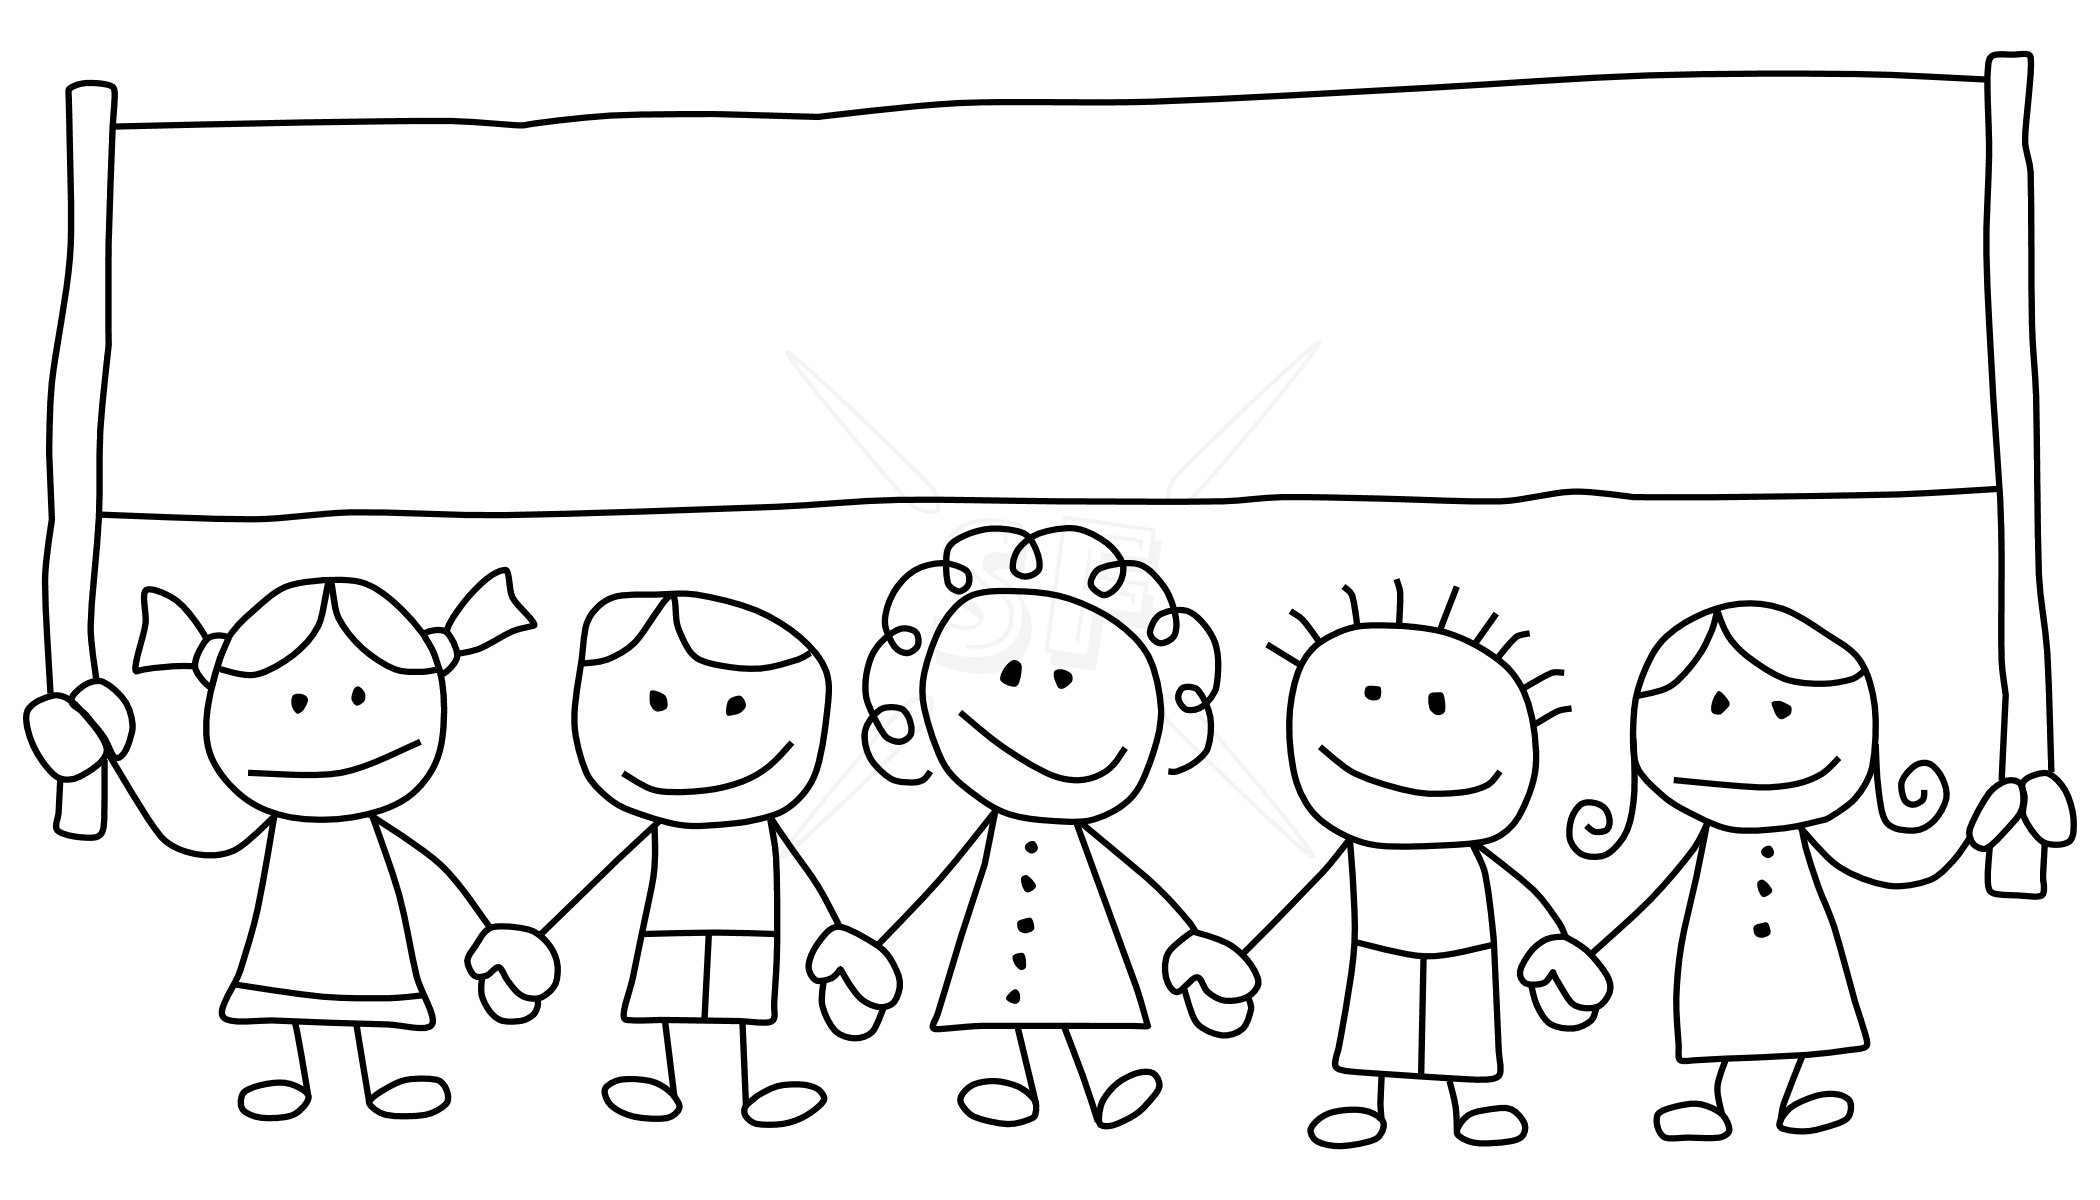 17  images about Stick people - Family Stick Figures Clip Art